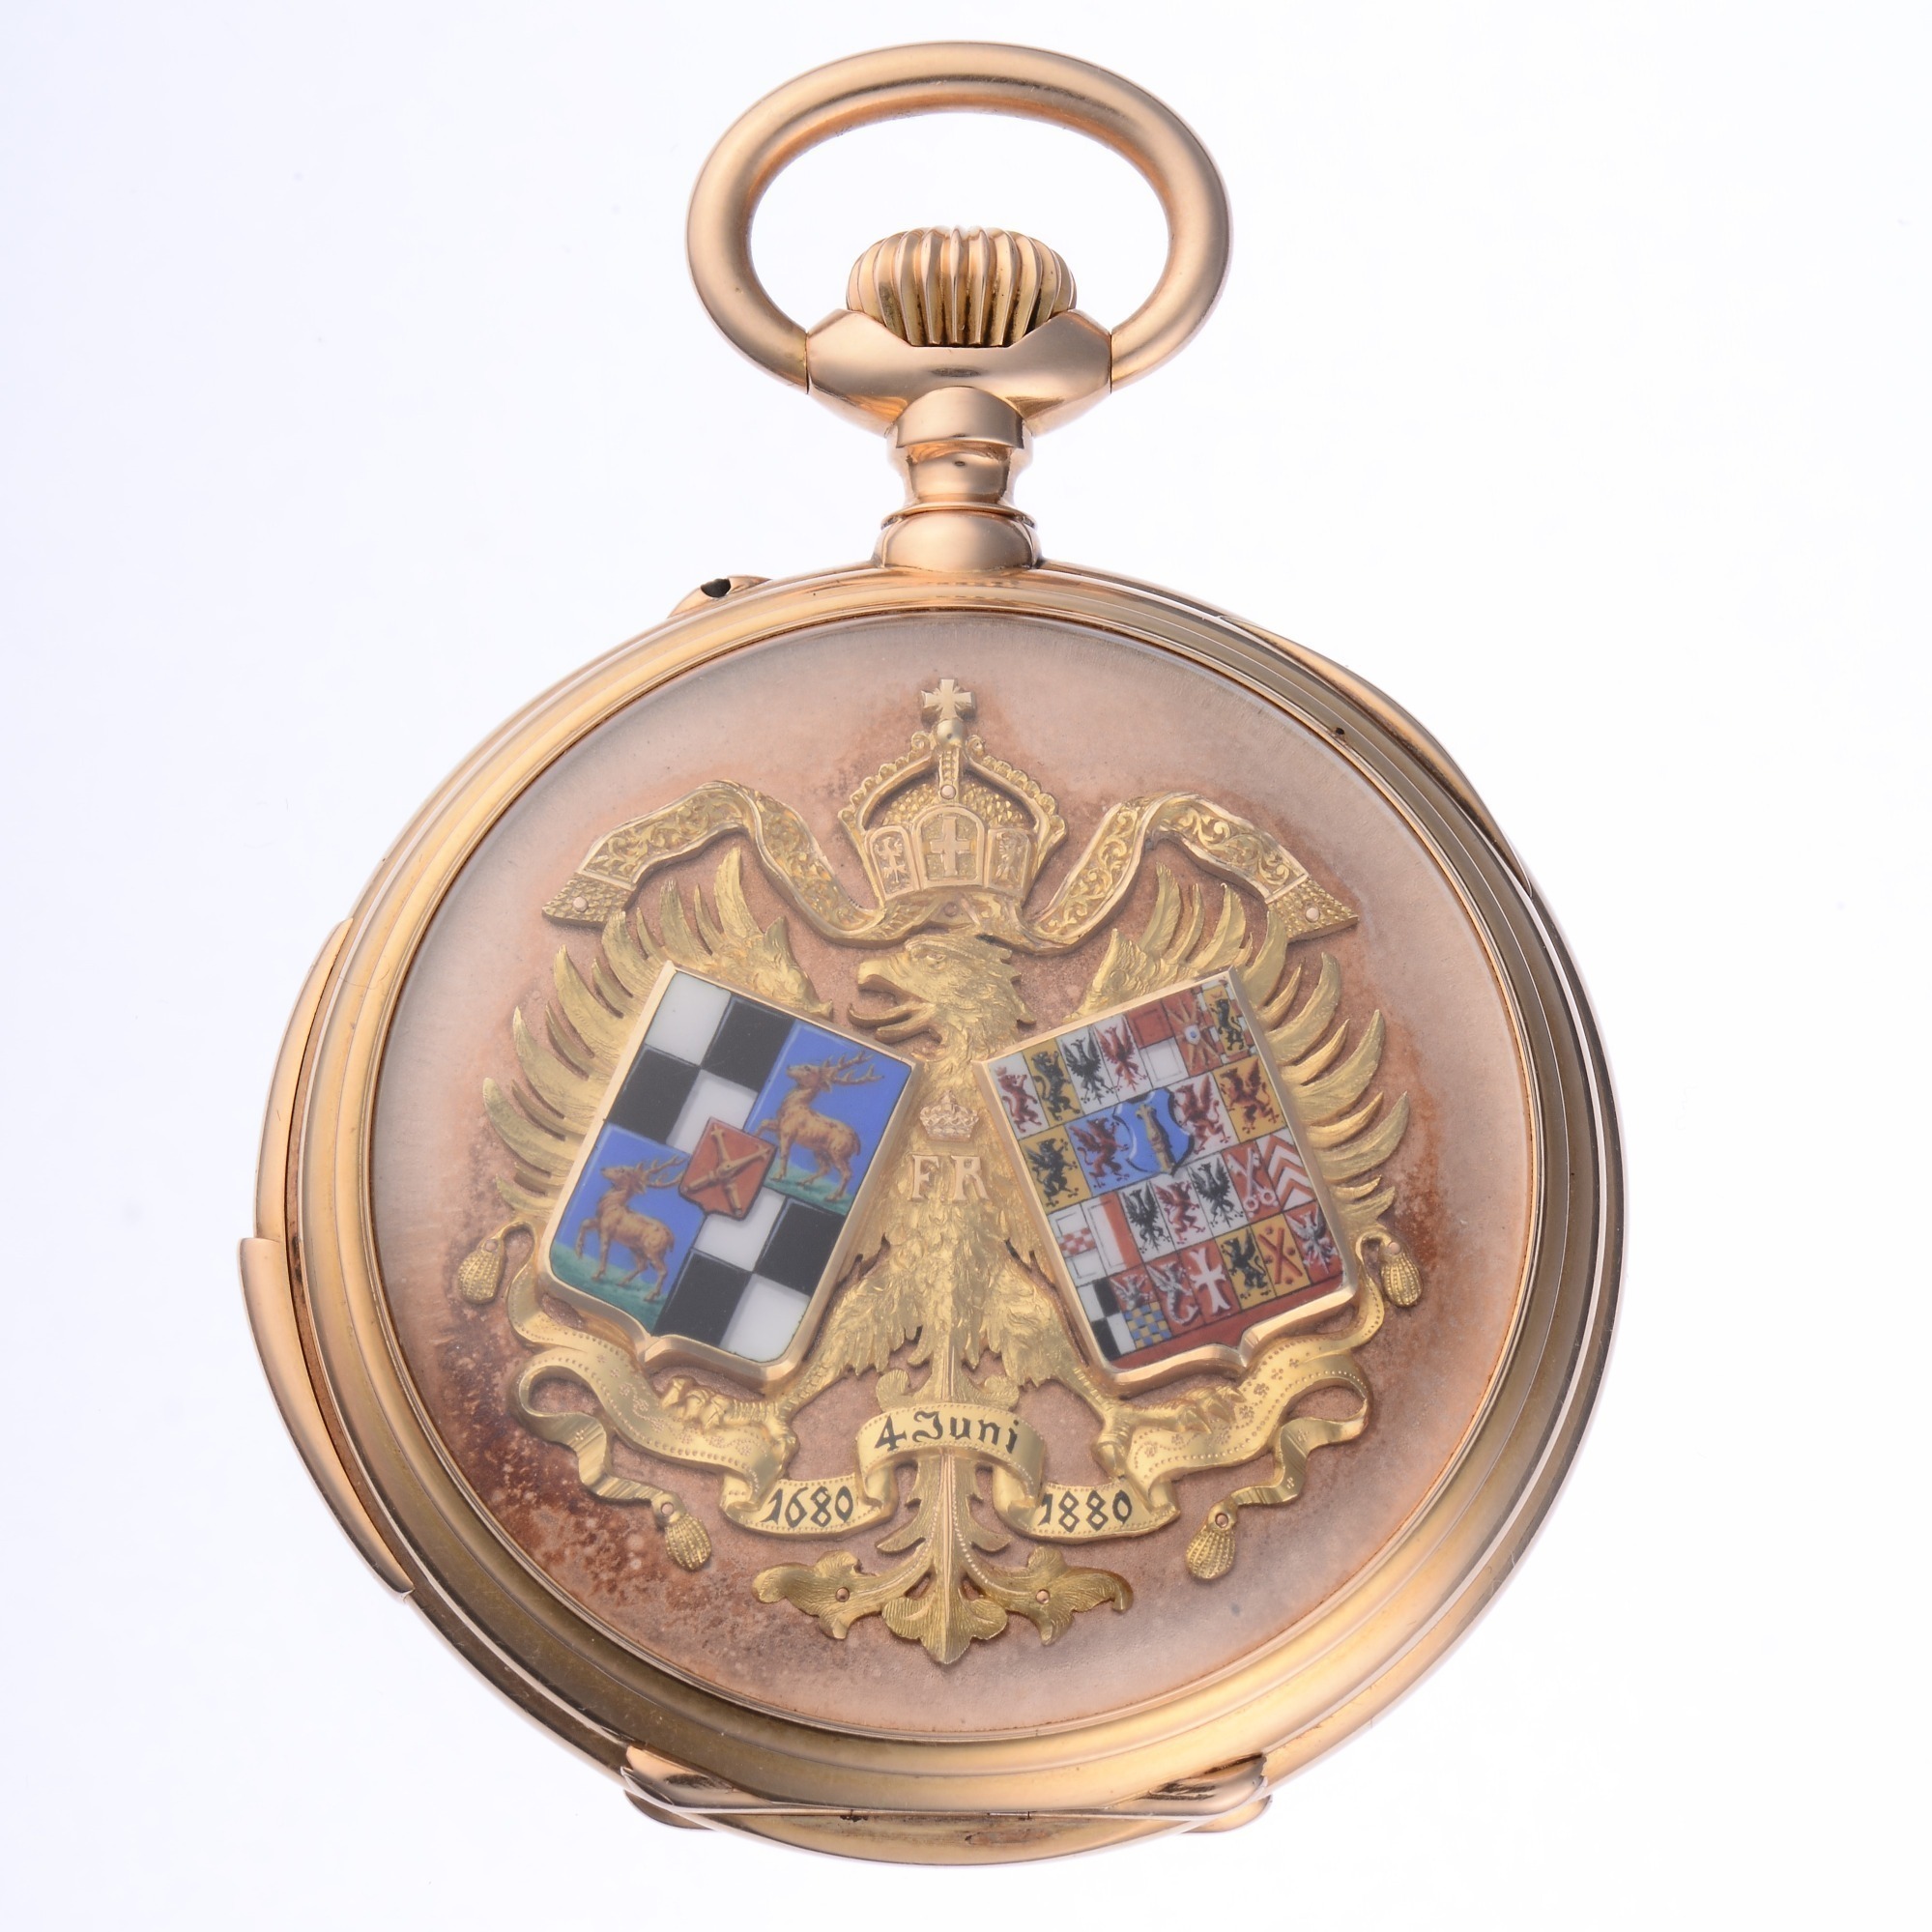 Willy Berger Quarter Hour Repeater 18K Rose Gold and Enamel Skeletonized Pocket Watch, Circa 1880